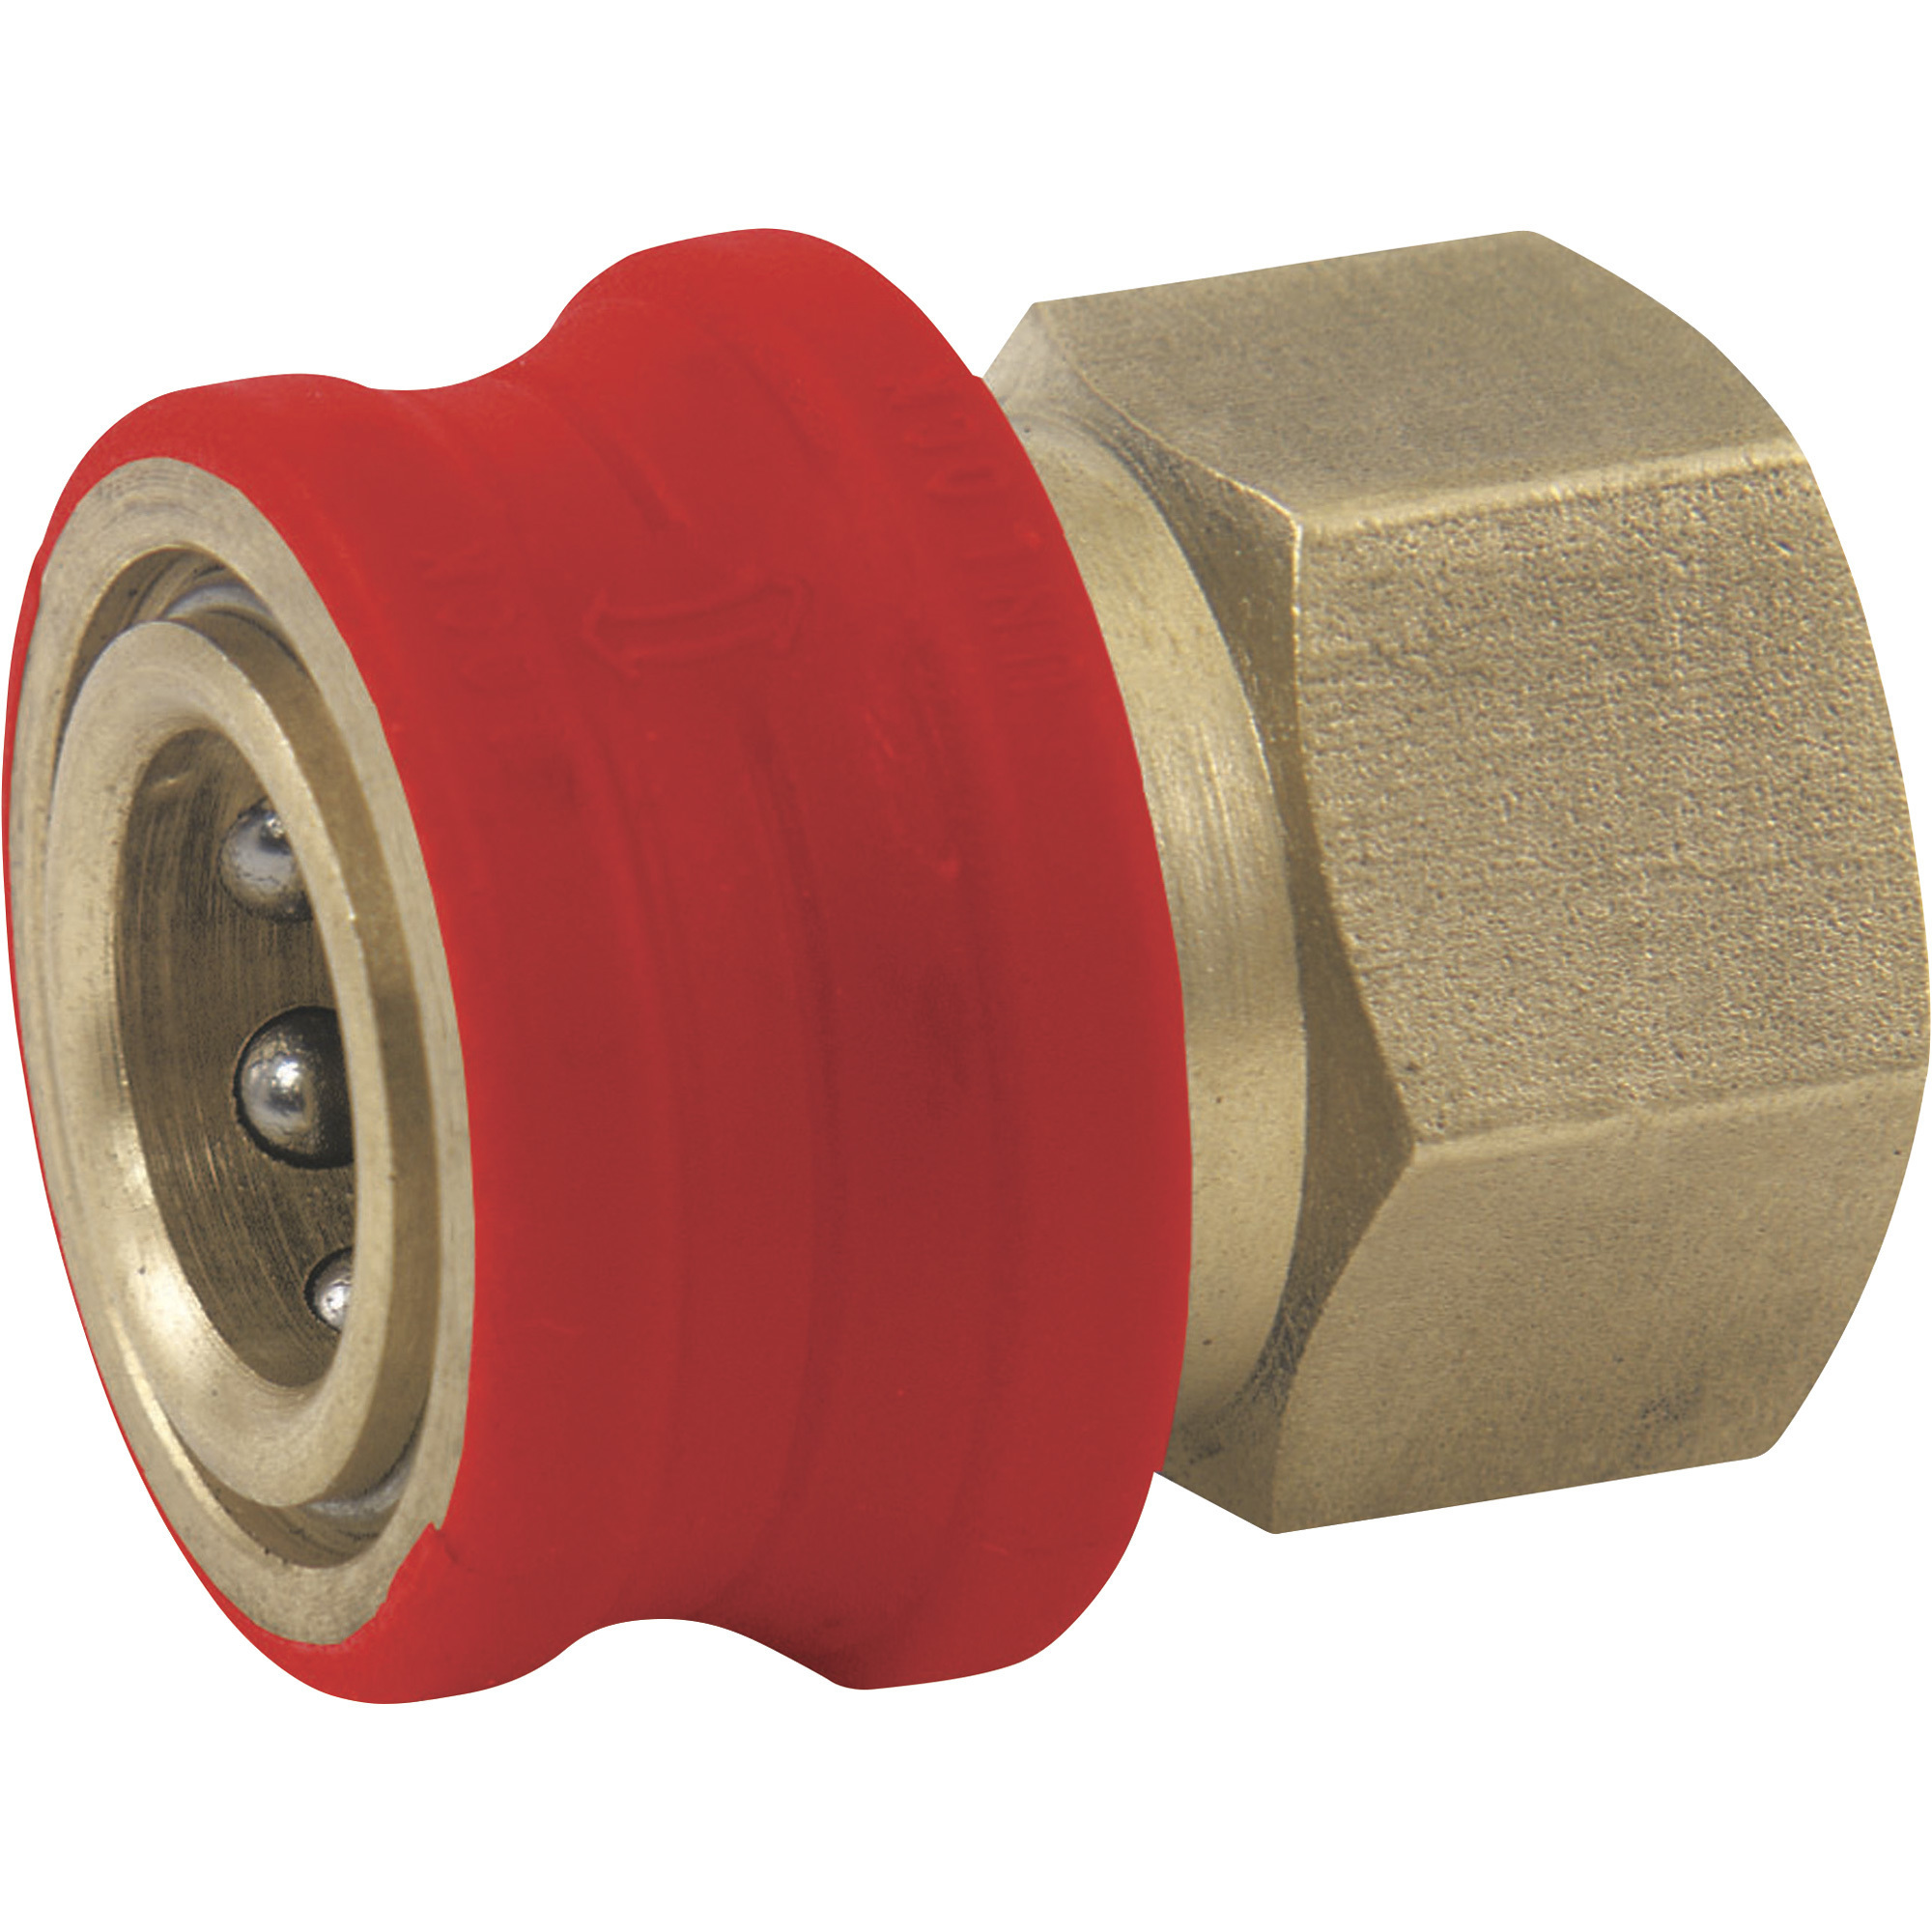 NorthStar Pressure Washer Insulated Quick-Connect Coupler â 3/8Inch NPT-F, 4500 PSI, 12.0 GPM, Brass, Model 2100384P